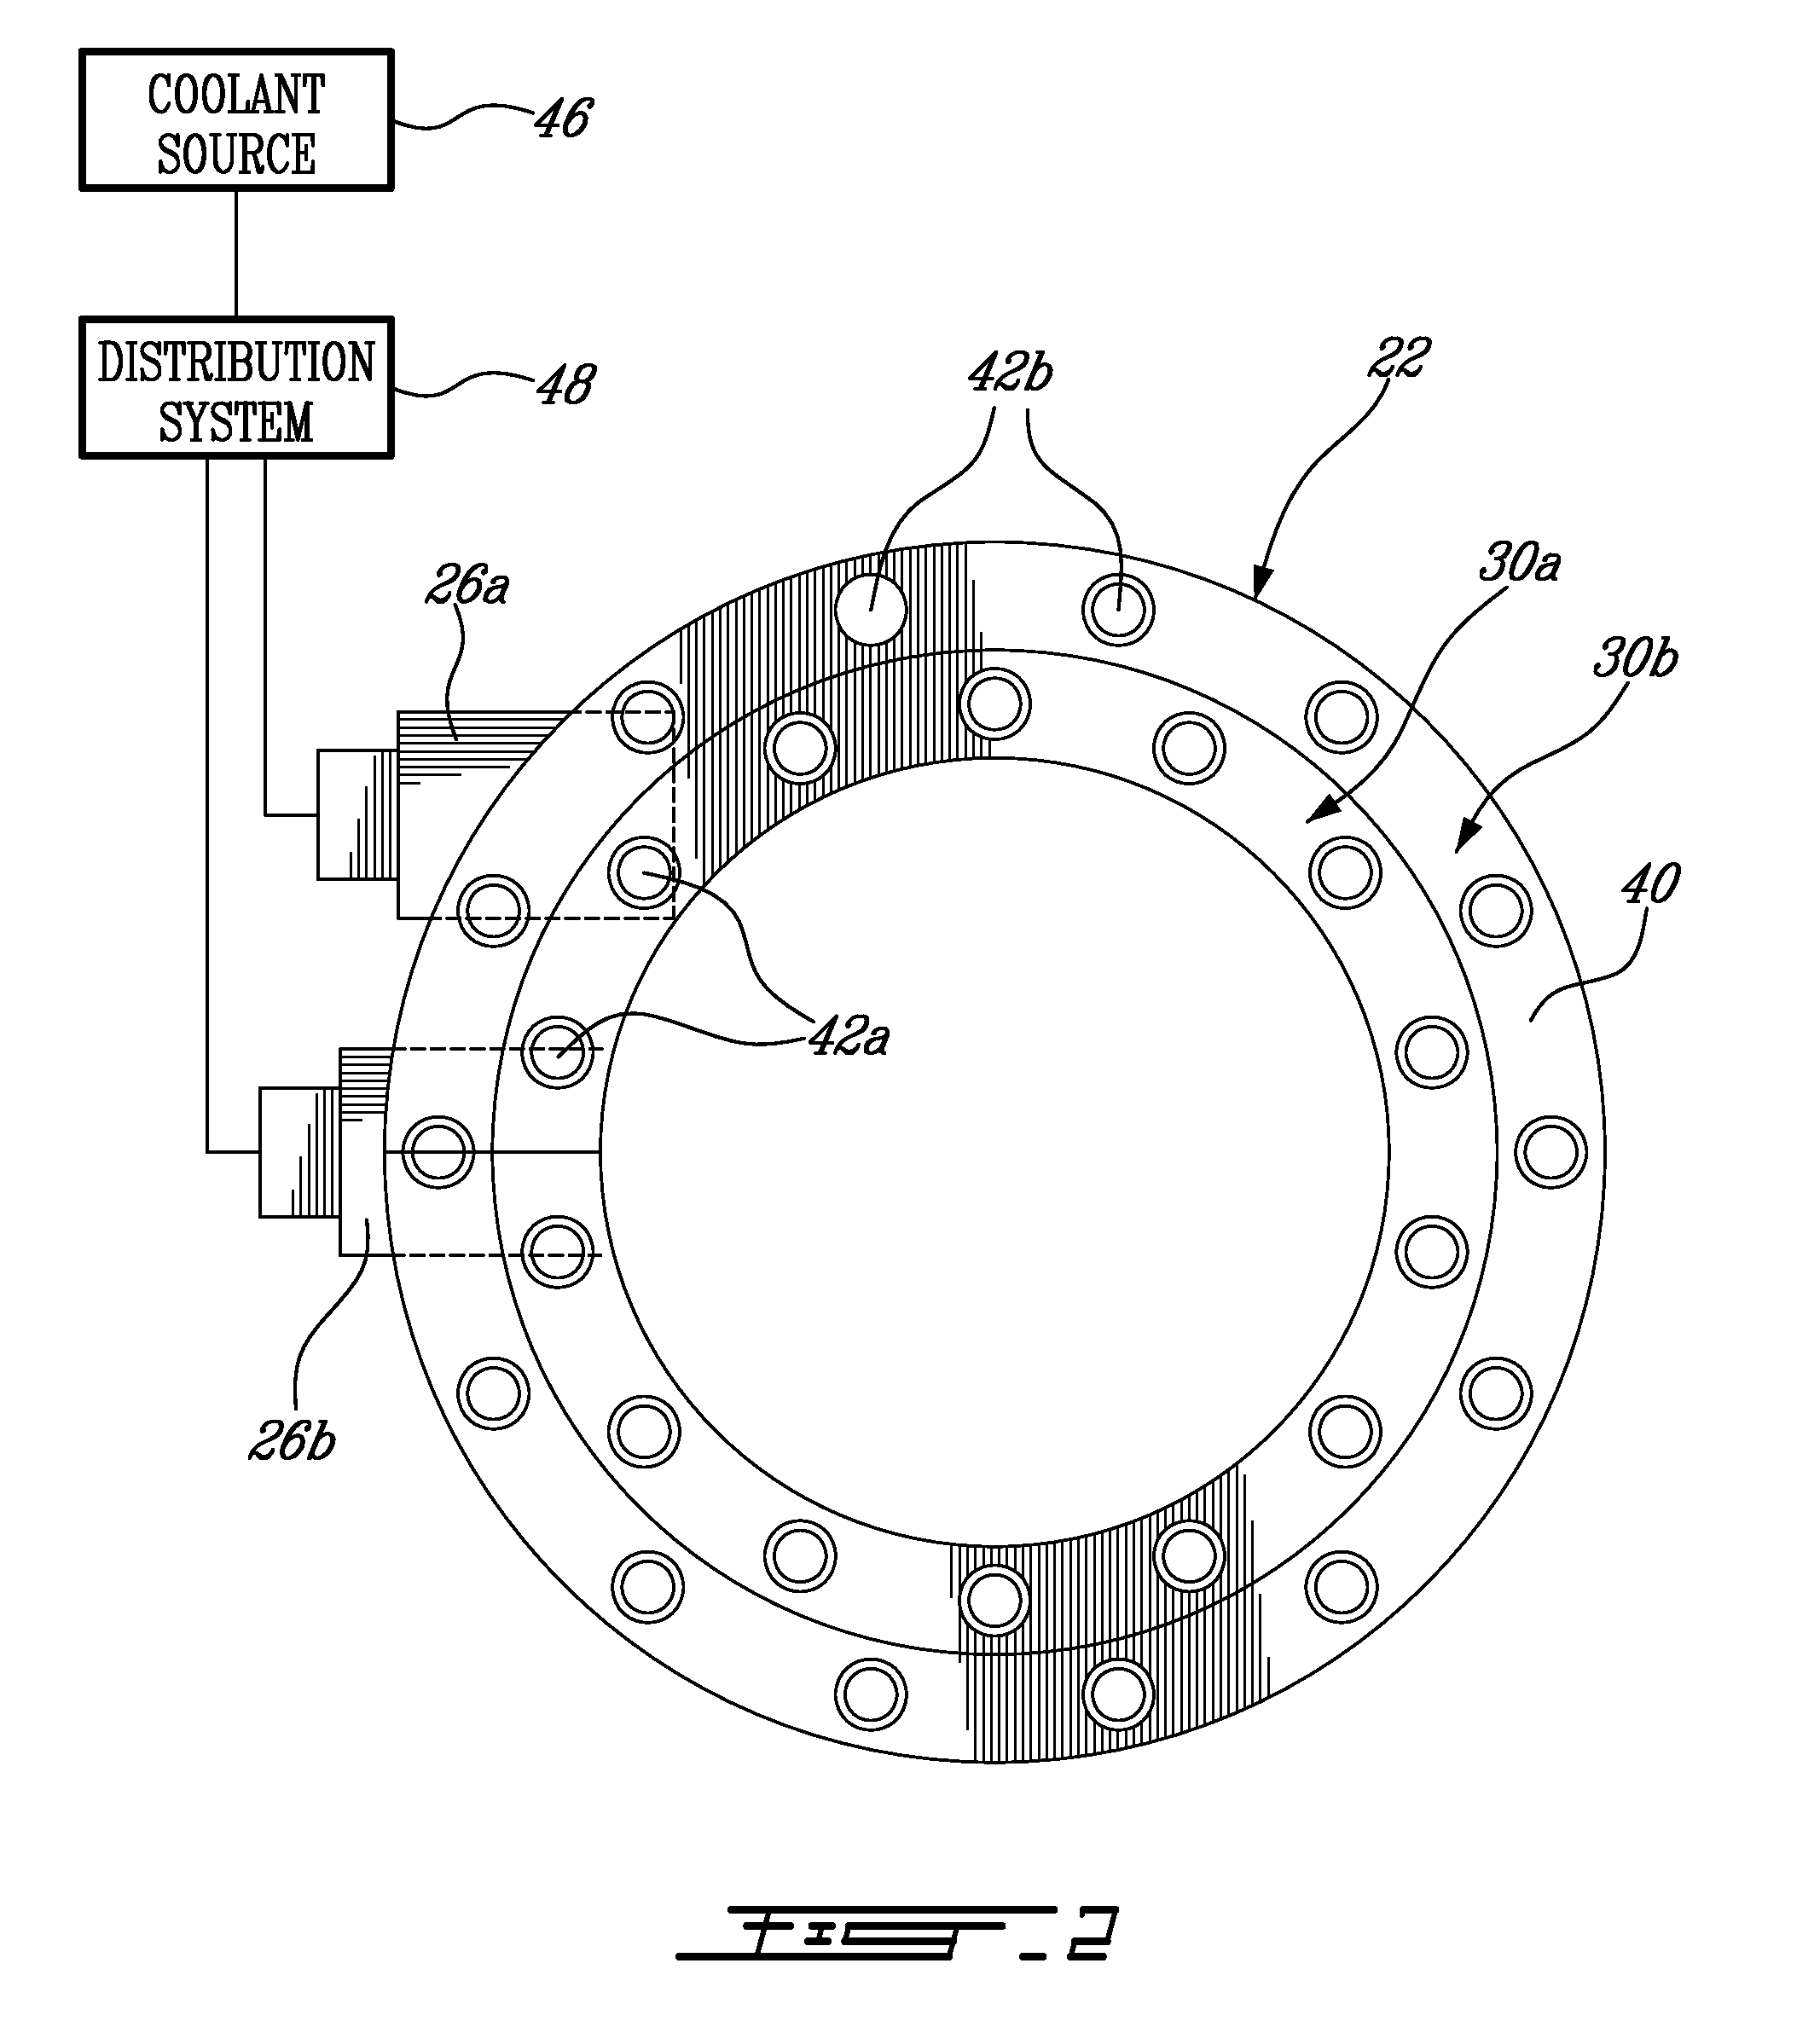 Multiple zone cooling apparatus